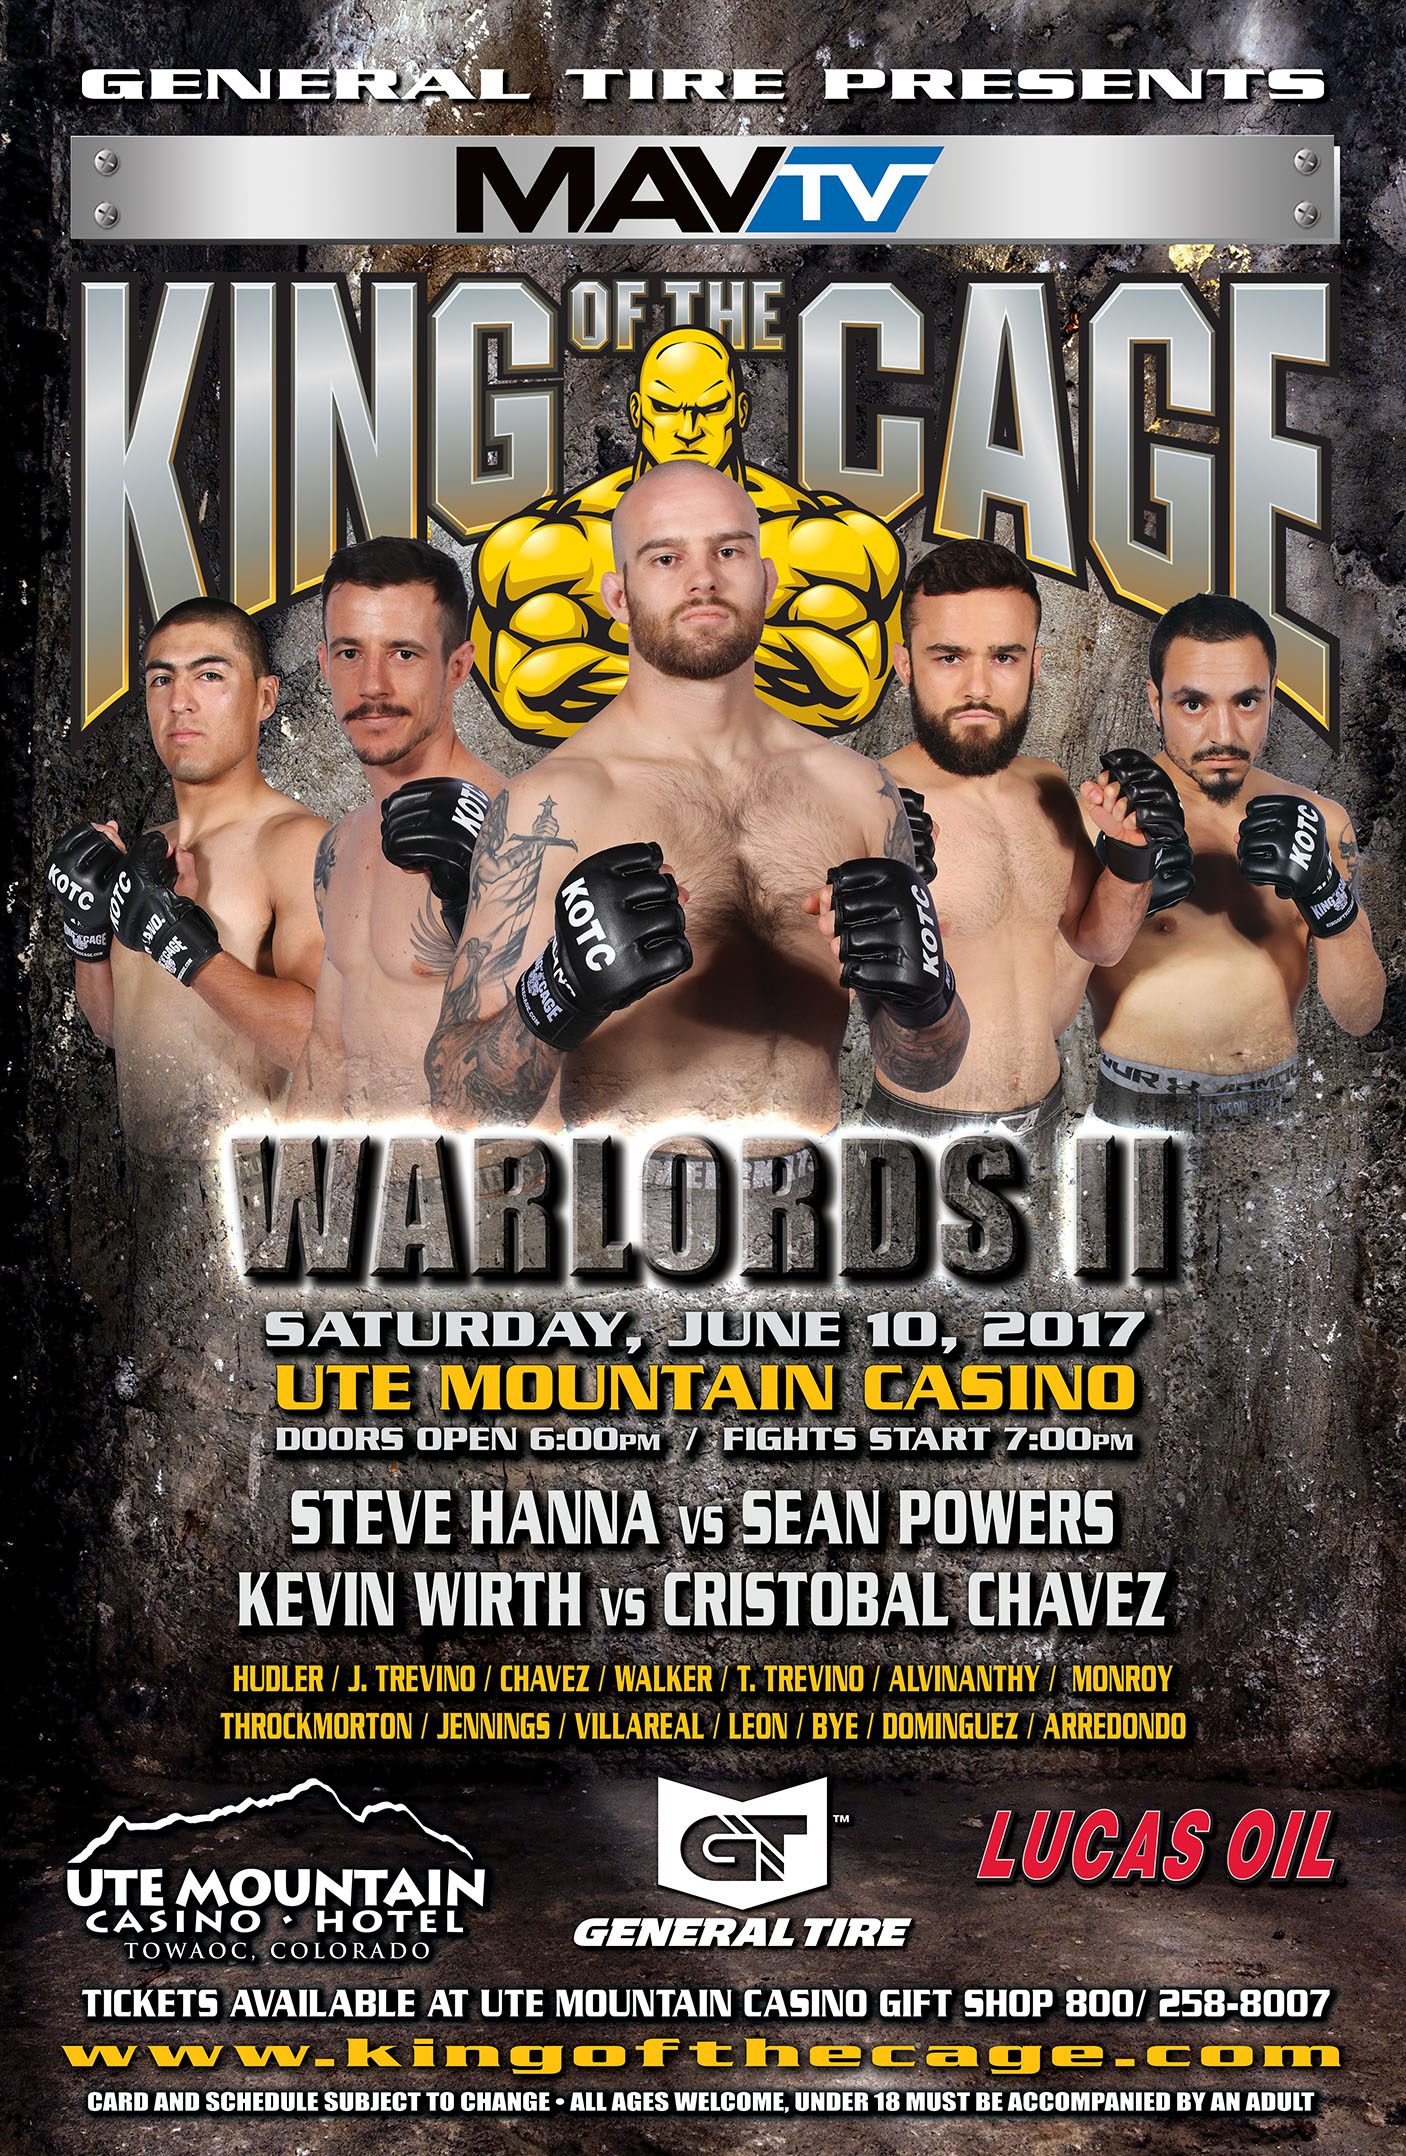 King of the Cage Returns to the Ute Mountain Casino, Hotel & Resort on June 10 for “WARLORDS II”